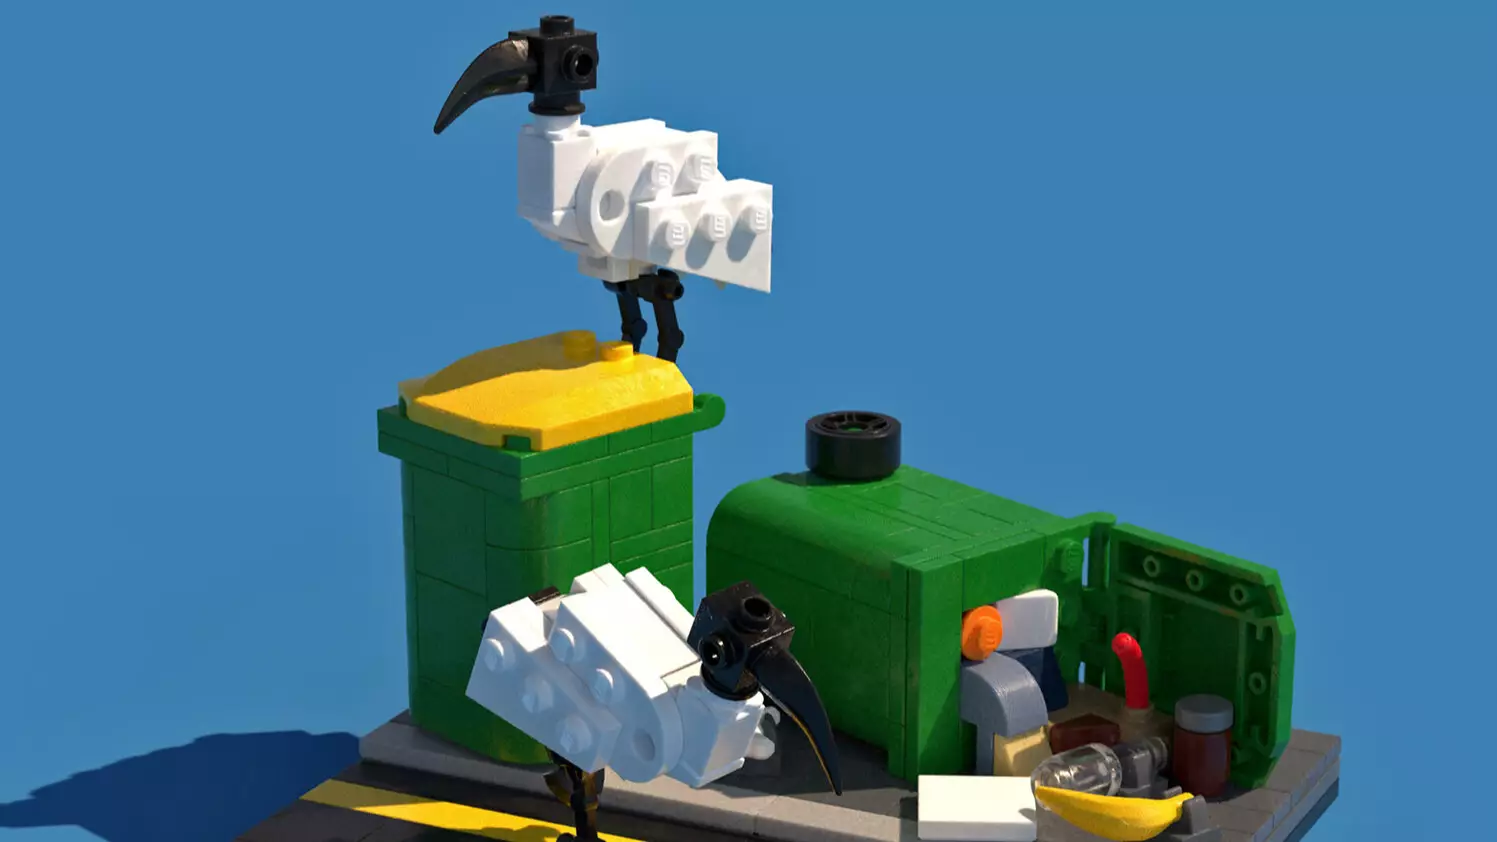 Legendary Aussie Gives Instructions On How To Create Bin Chicken Scene With LEGO